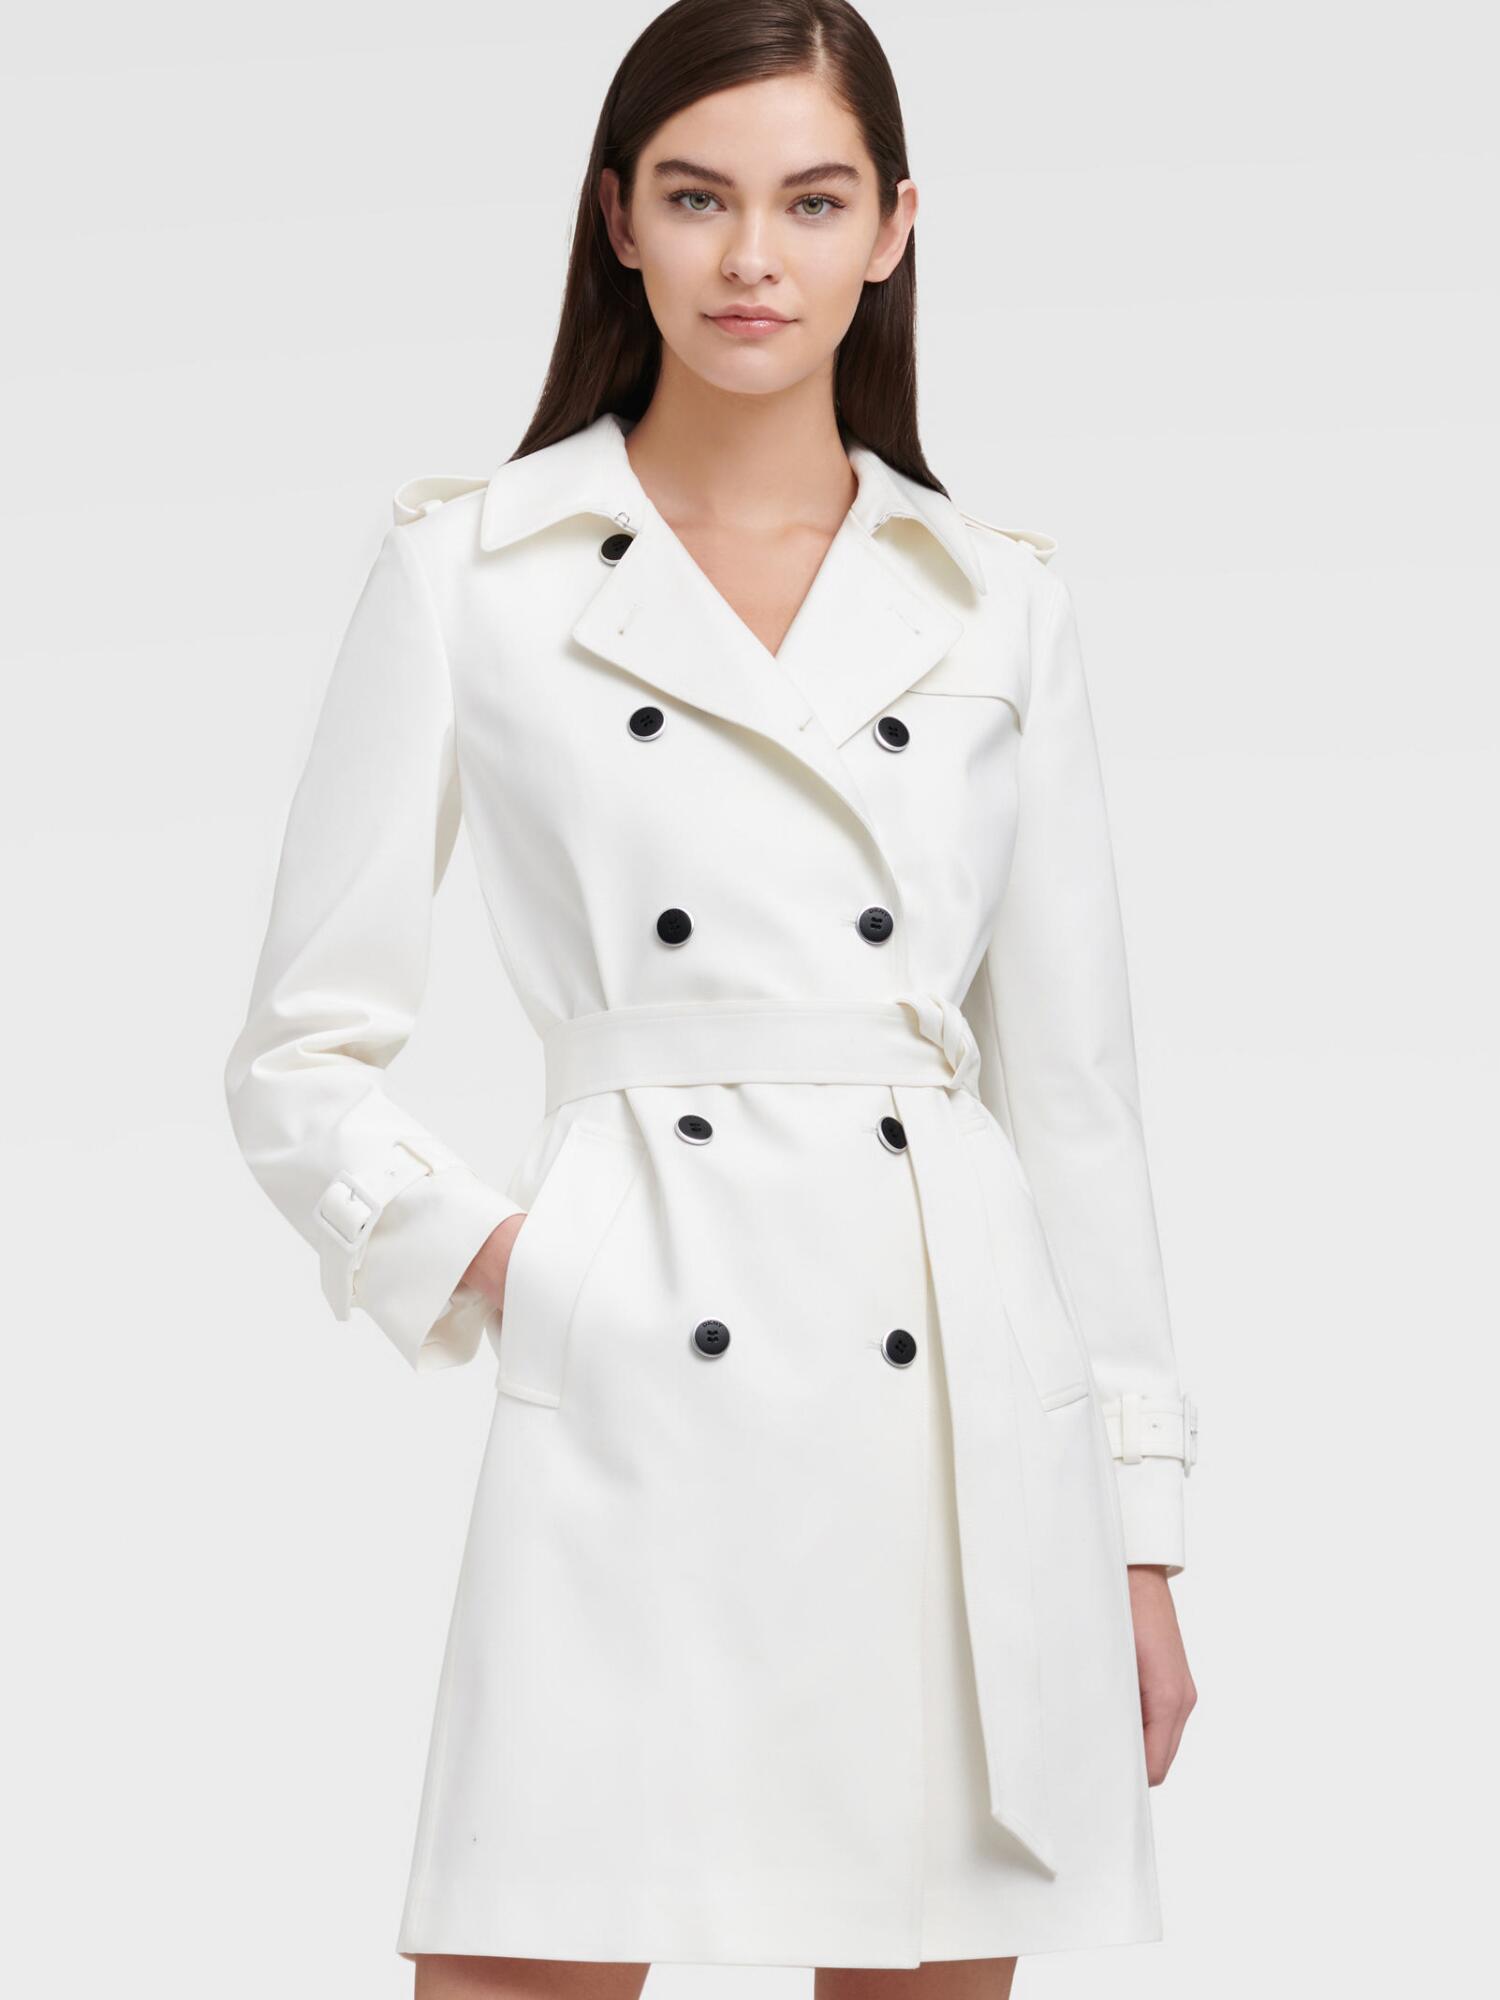 DKNY Belted Trench Coat in Ivory (White) - Save 43% - Lyst